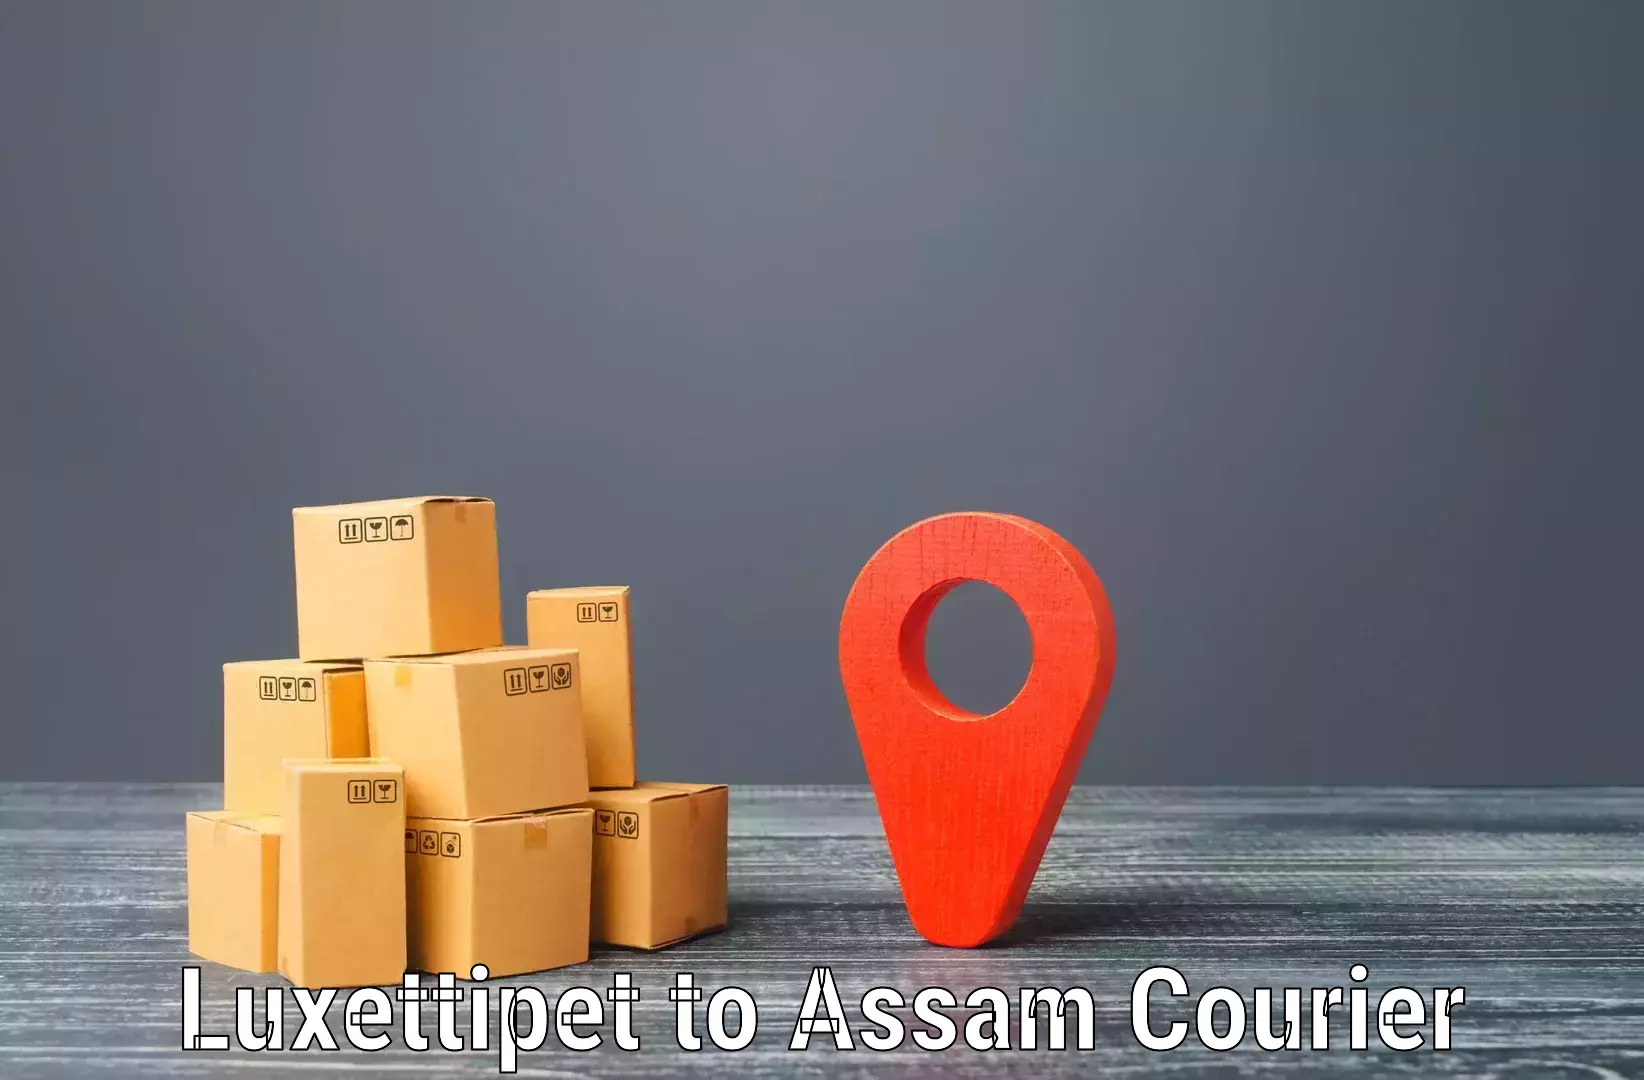 Express delivery capabilities in Luxettipet to Morigaon